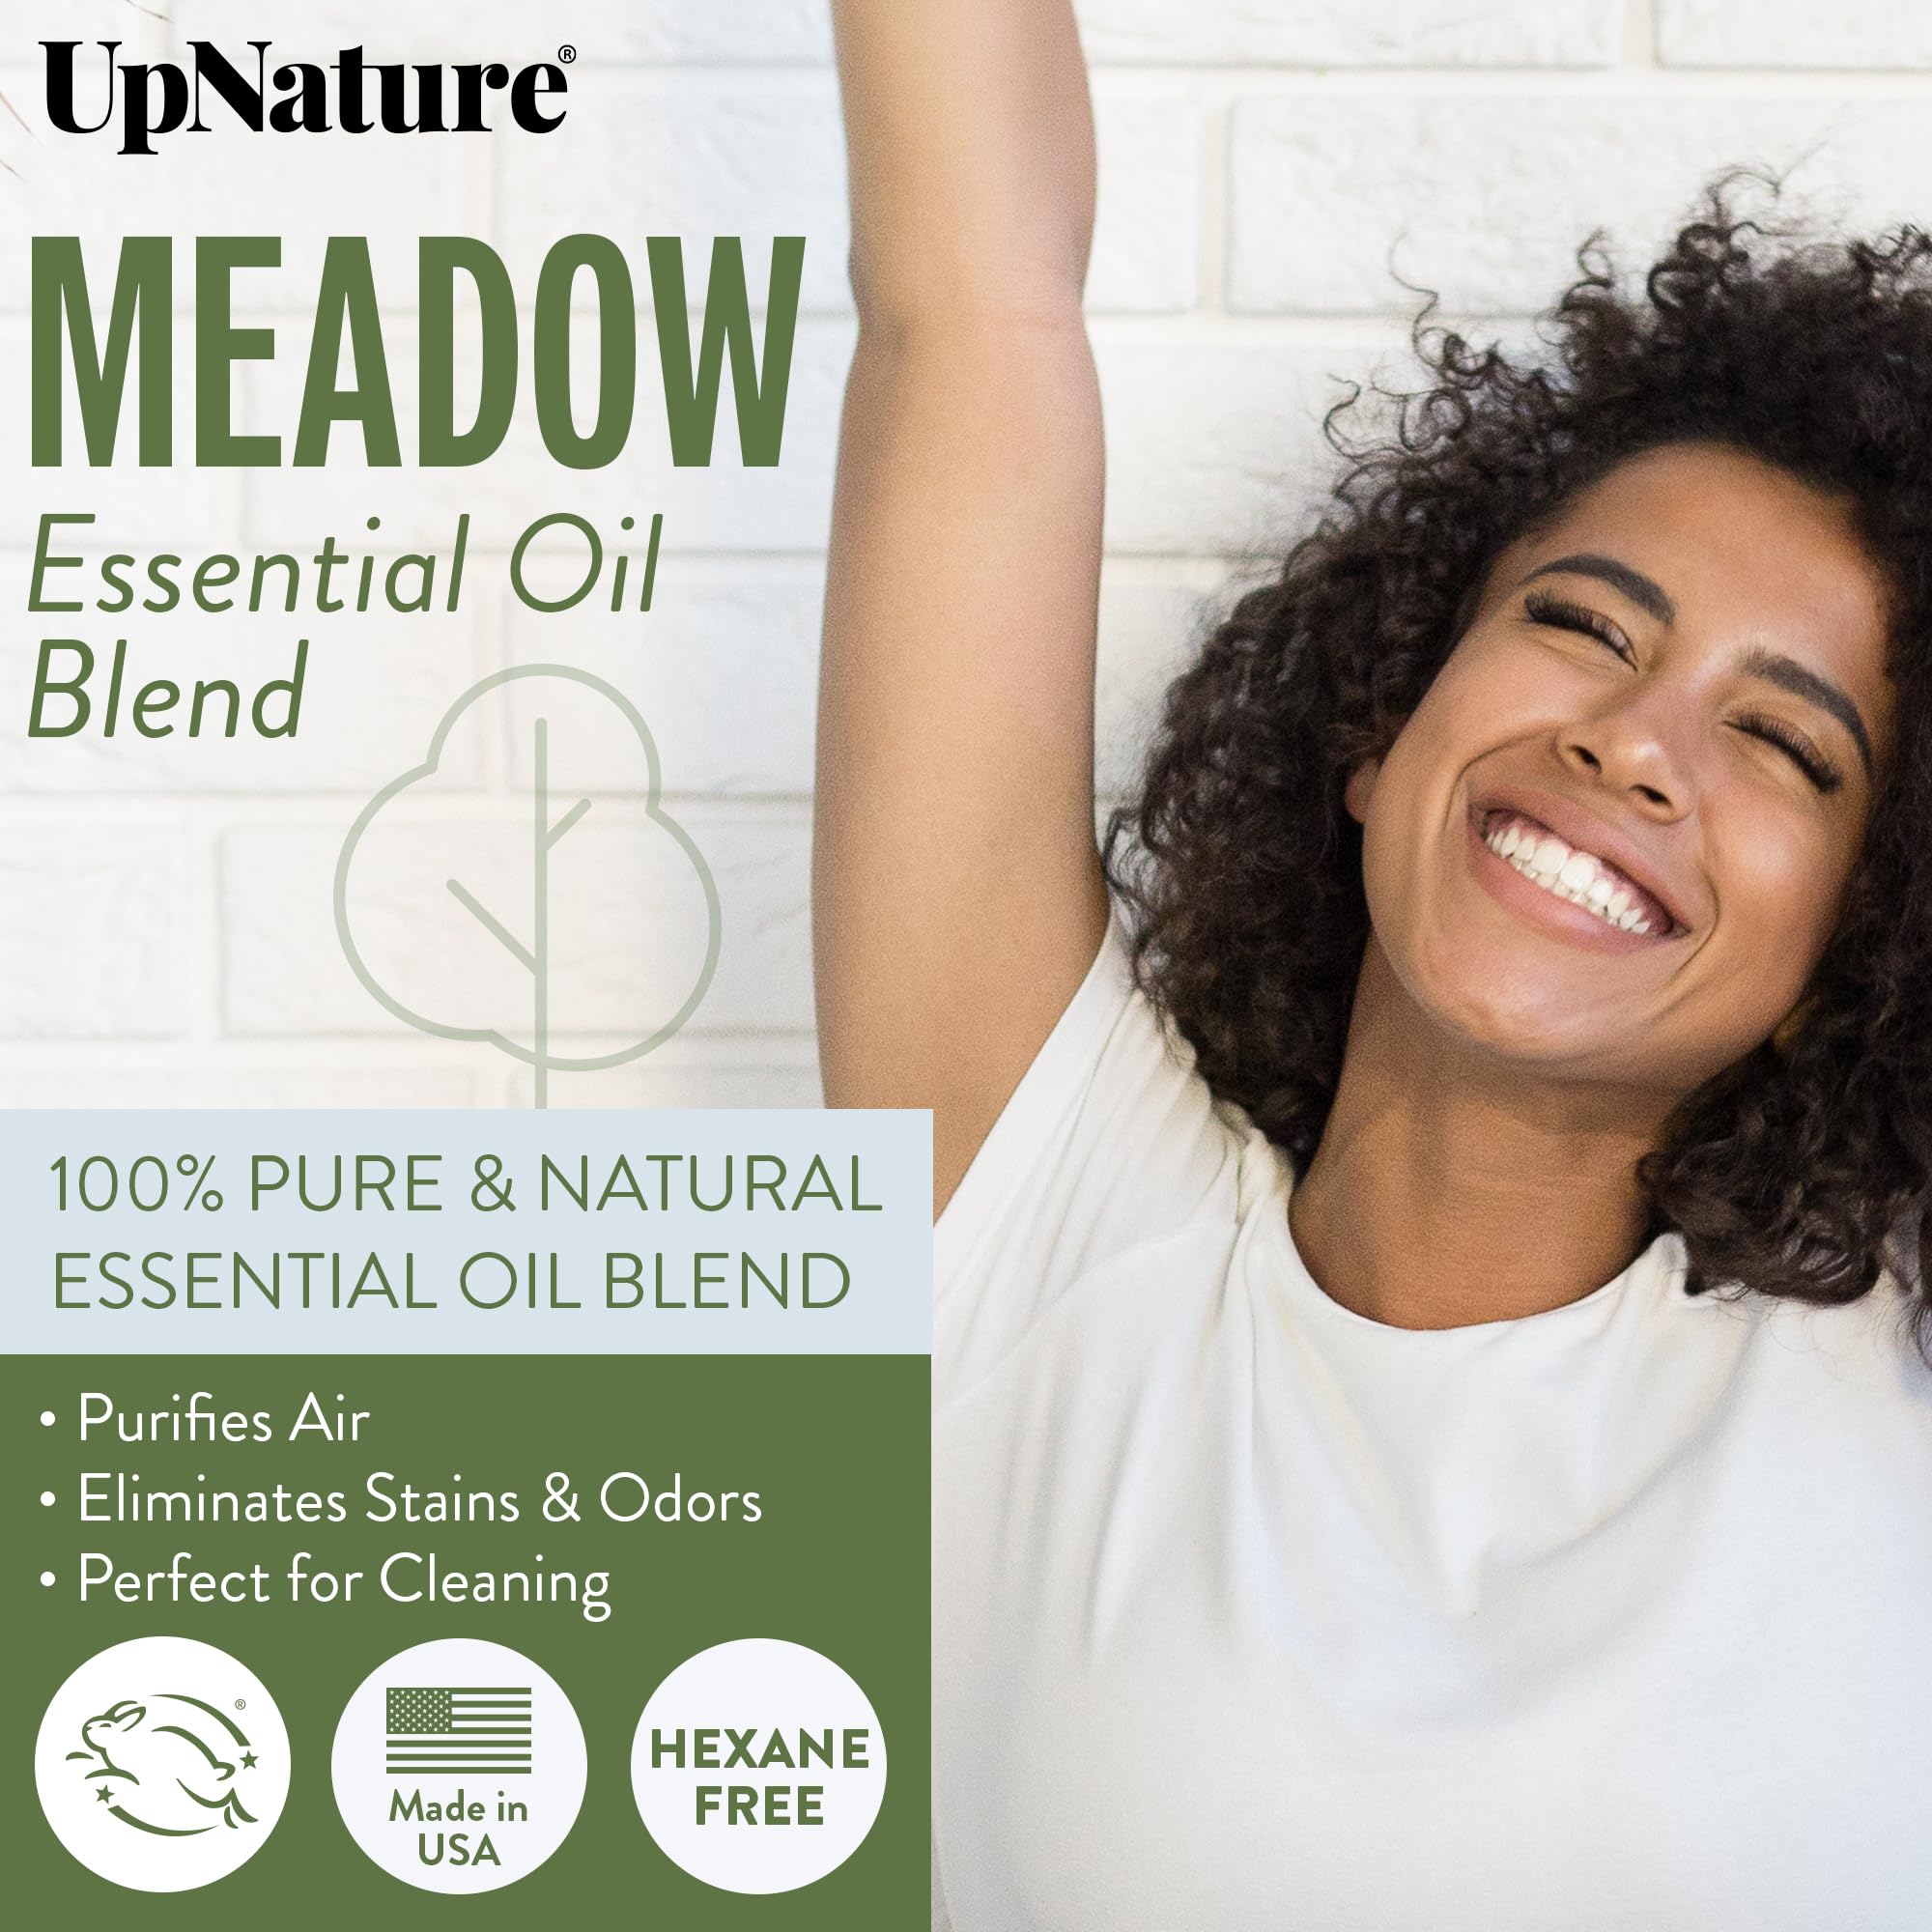 Meadow Essential Oil Blend 2oz - Natural Household All Purpose Cleaning Blend, Floral & Fresh Linen Essential Oil with Lavender Essential Oil, Ylang-Ylang Essential Oil & Eucalyptus Essential Oil